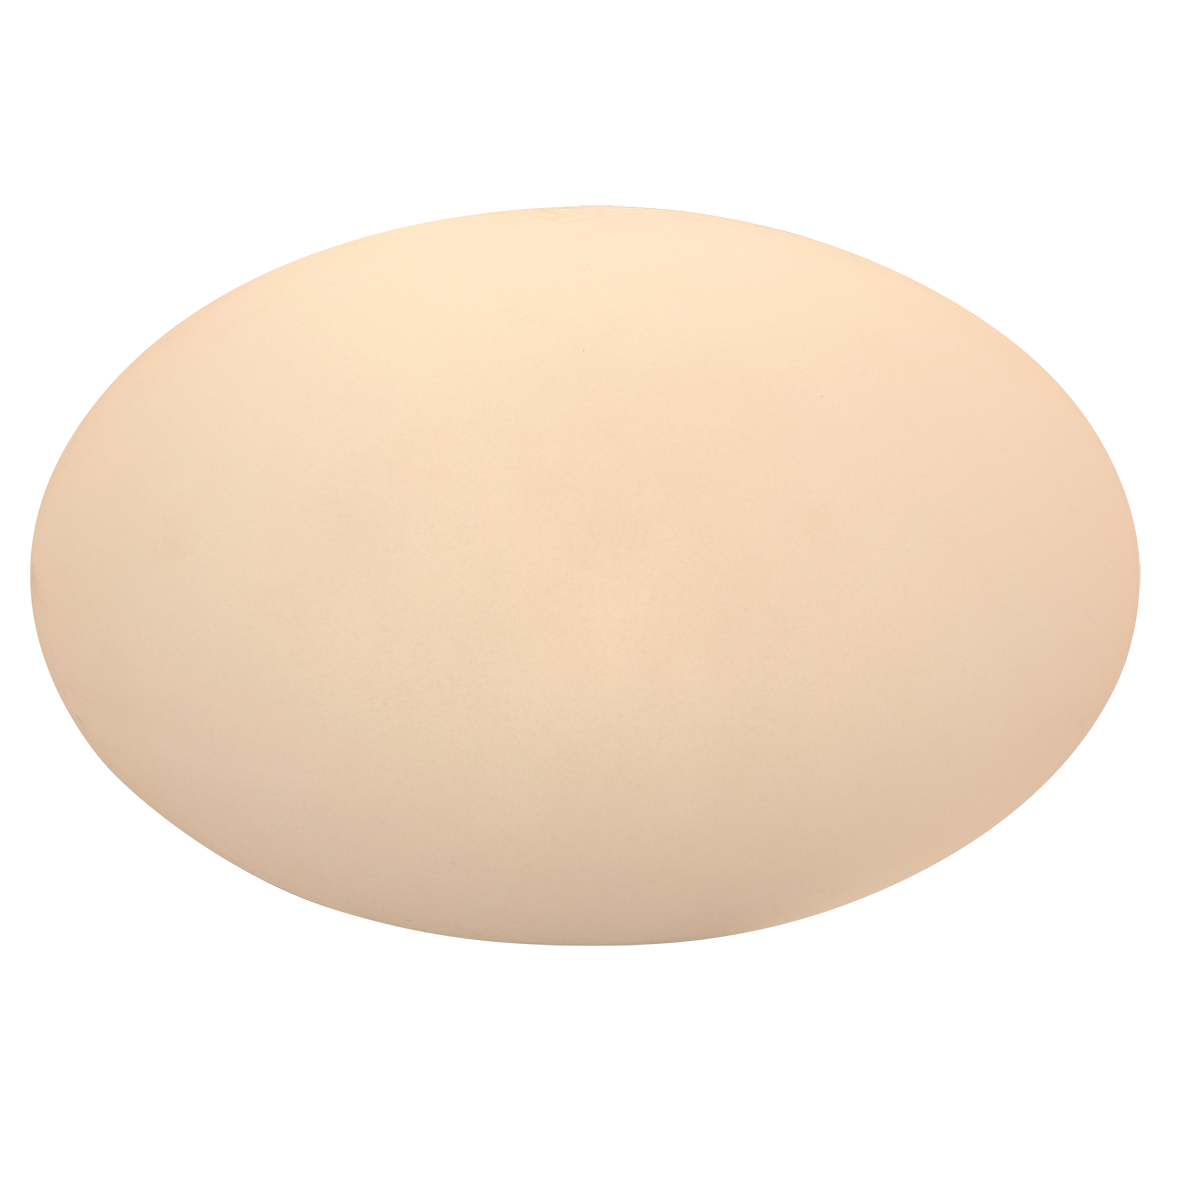 Oval 28 2566451.png